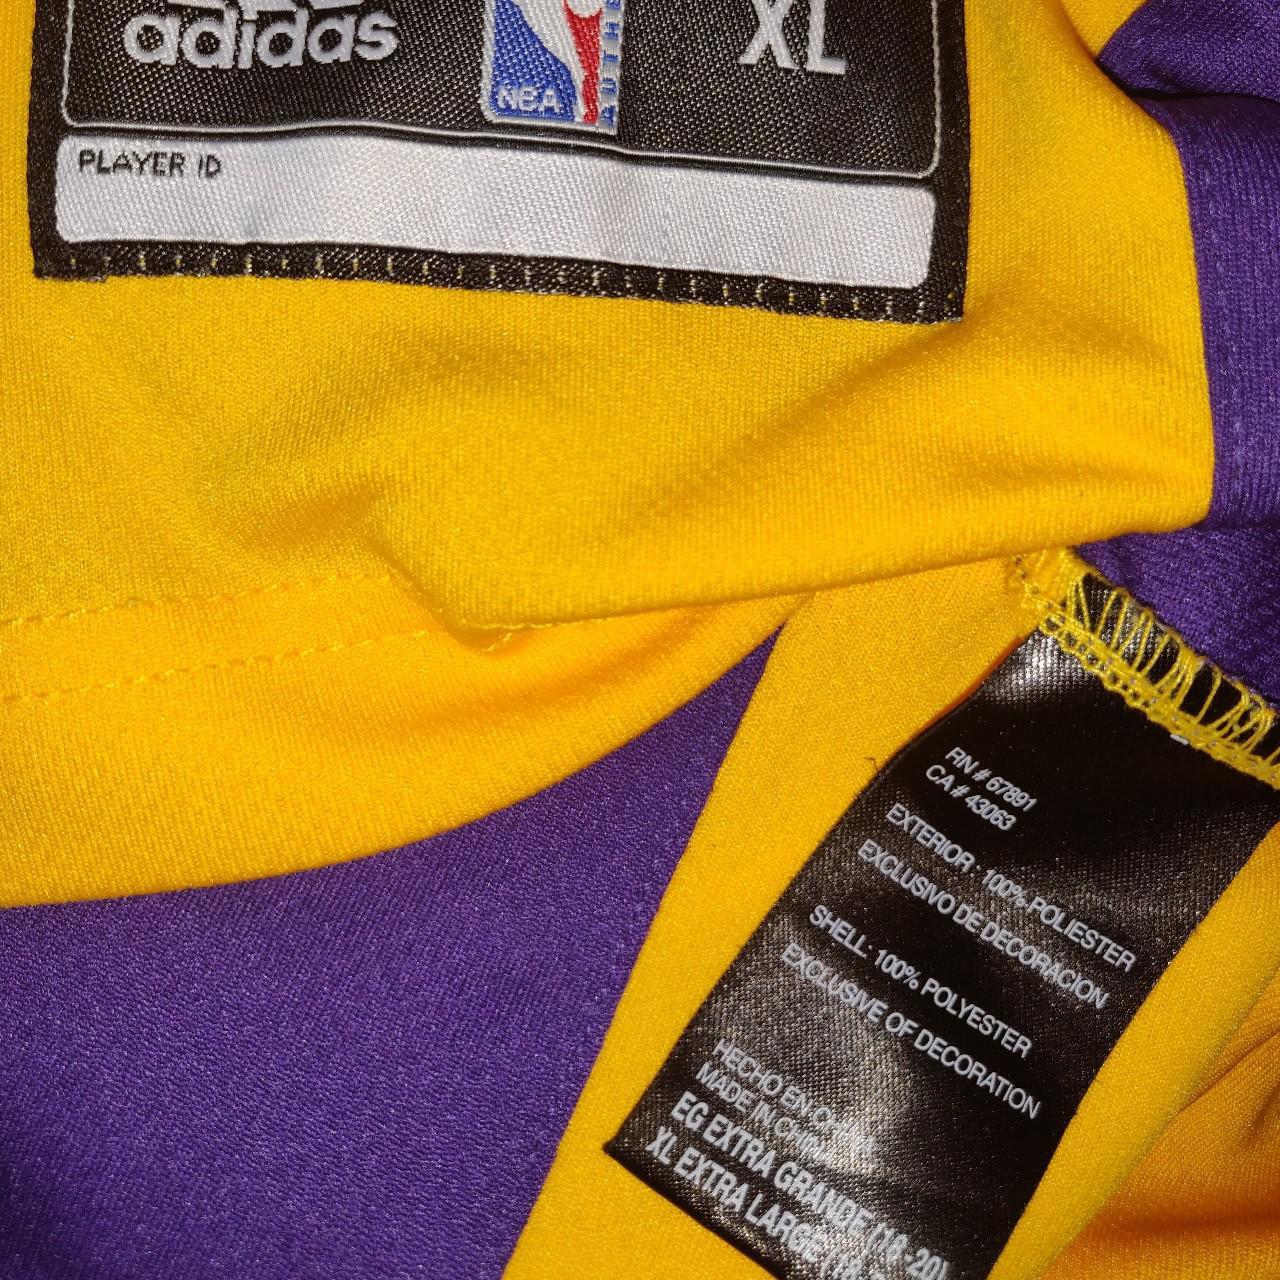 Repop Vintage purple and yellow Lakers jersey shorts - Depop